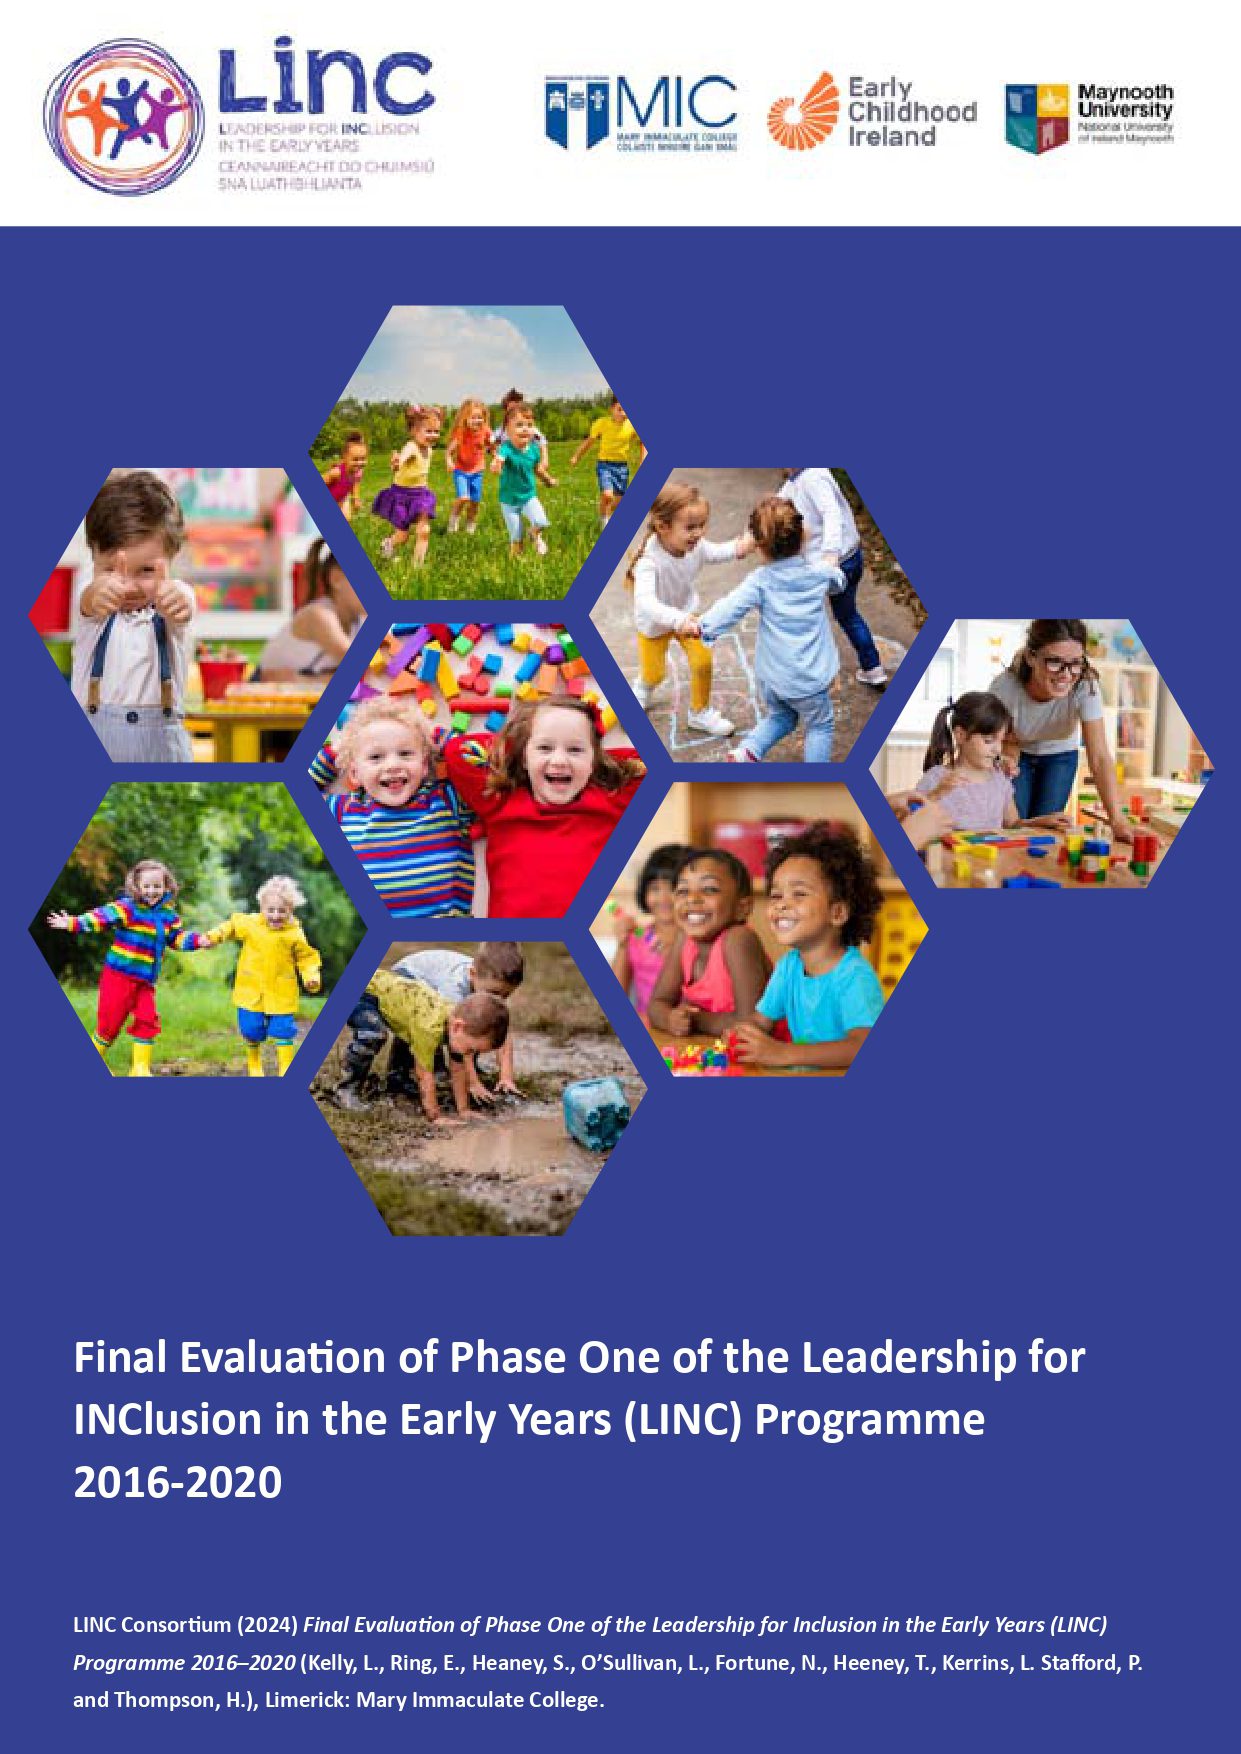 Final Evaluation of Phase One of the Leadership for Inclusion in the Early Years (LINC) Programme (2016-2020)